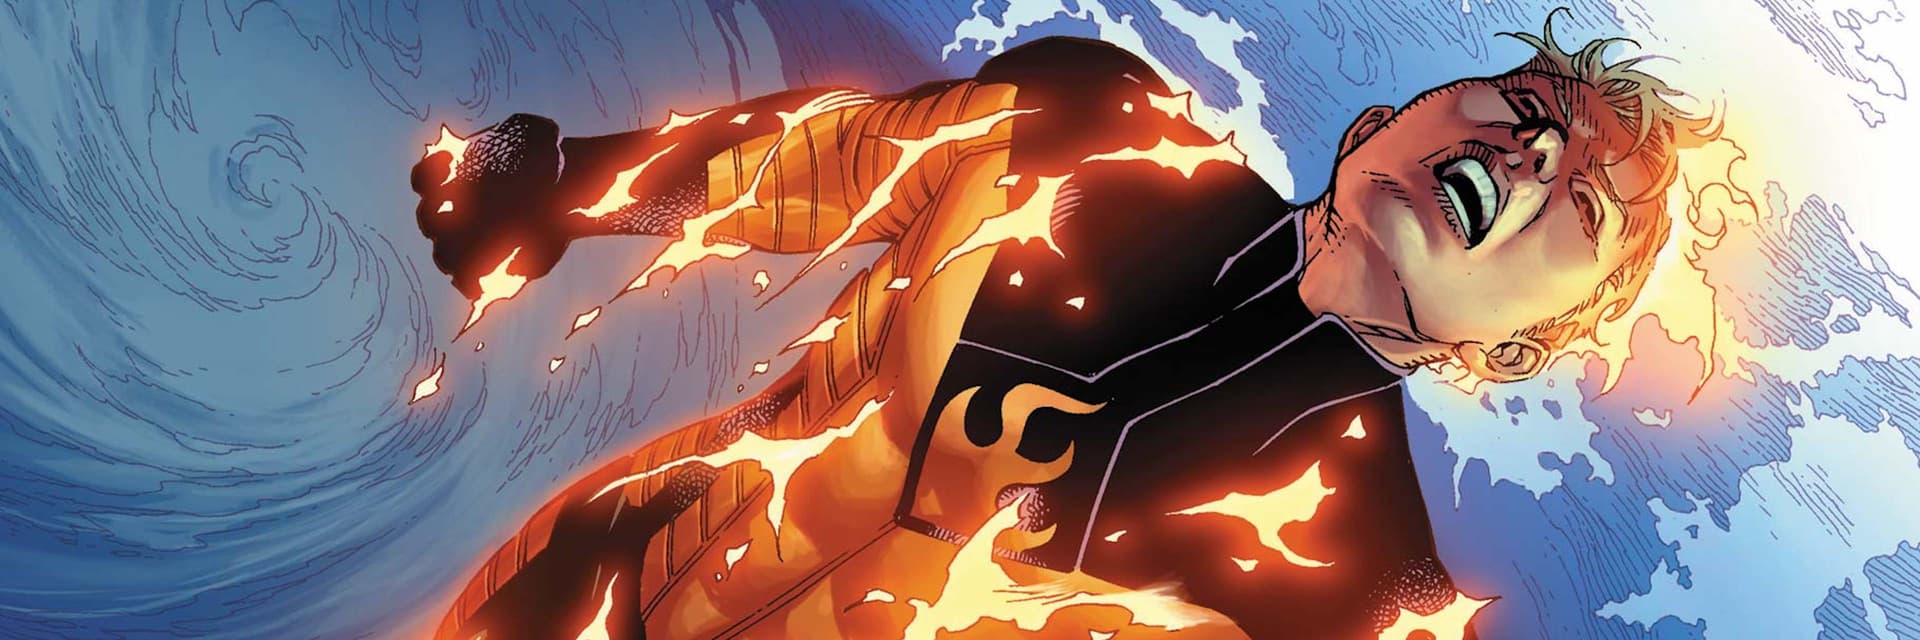 The Human Torch (Johnny Storm)